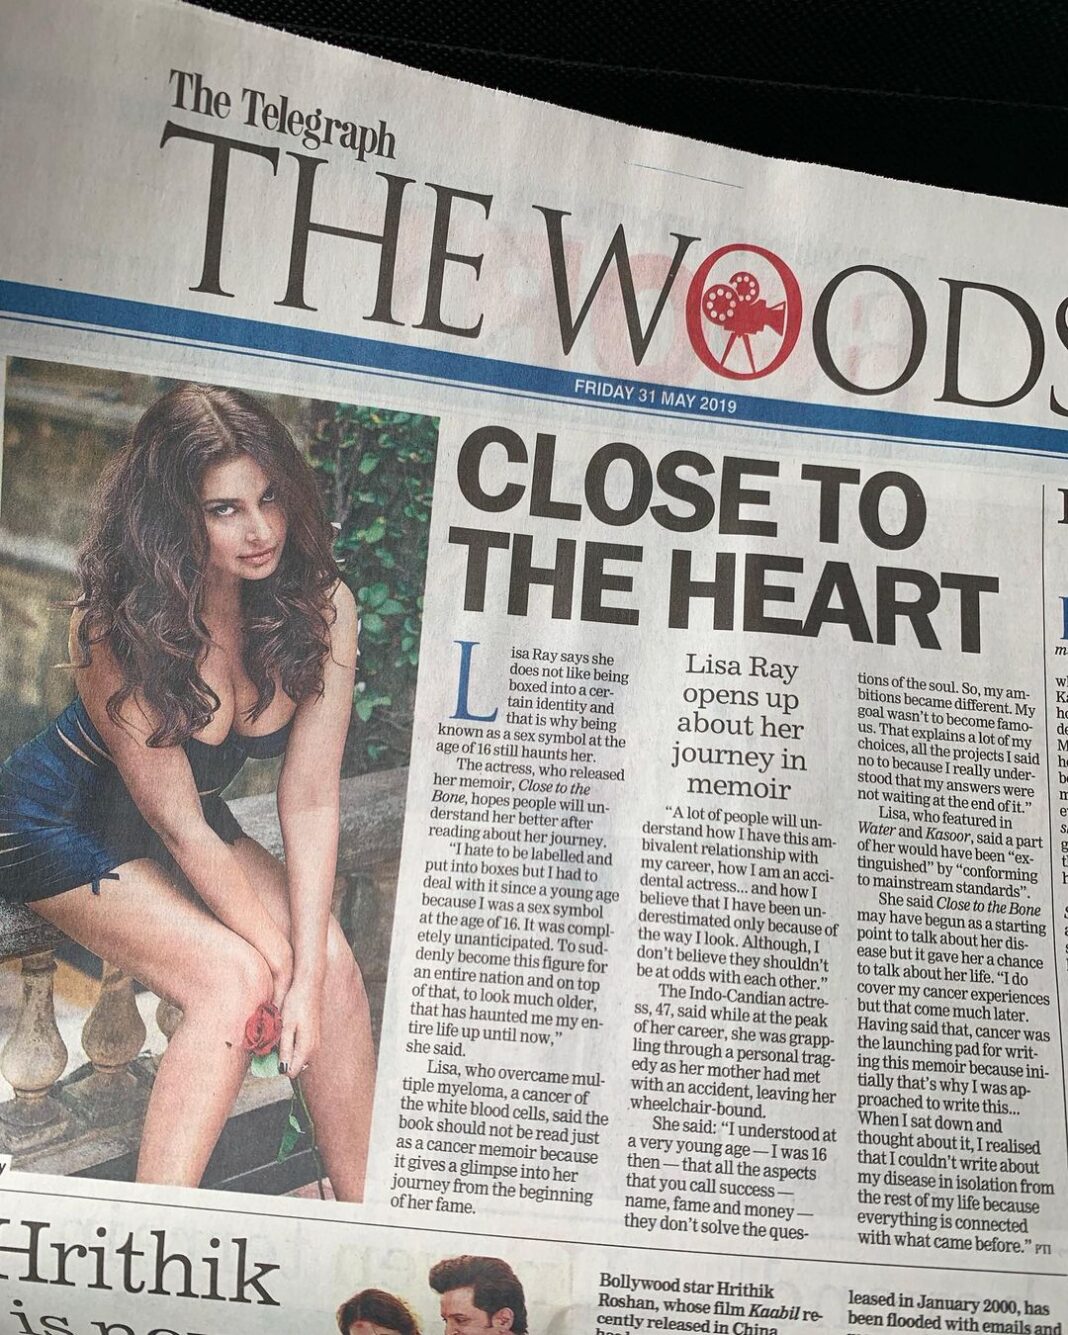 Lisa Ray Instagram - Does anyone else see the irony in using THIS image - instead of an author image provided by my publisher - for an article about my memoir @CloseToTheBone_ where I talk about struggling as a women with overcoming sexist stereotypes? Just landed in #Kolkata and I must say I’m disappointed With #TheTelegraph unless I’m missing the punchline? I’ve written in depth on this manner of casual sexism during the 90s in India in @closetothebone.book but it seems it still persists. We NEED to change the narrative. What say?